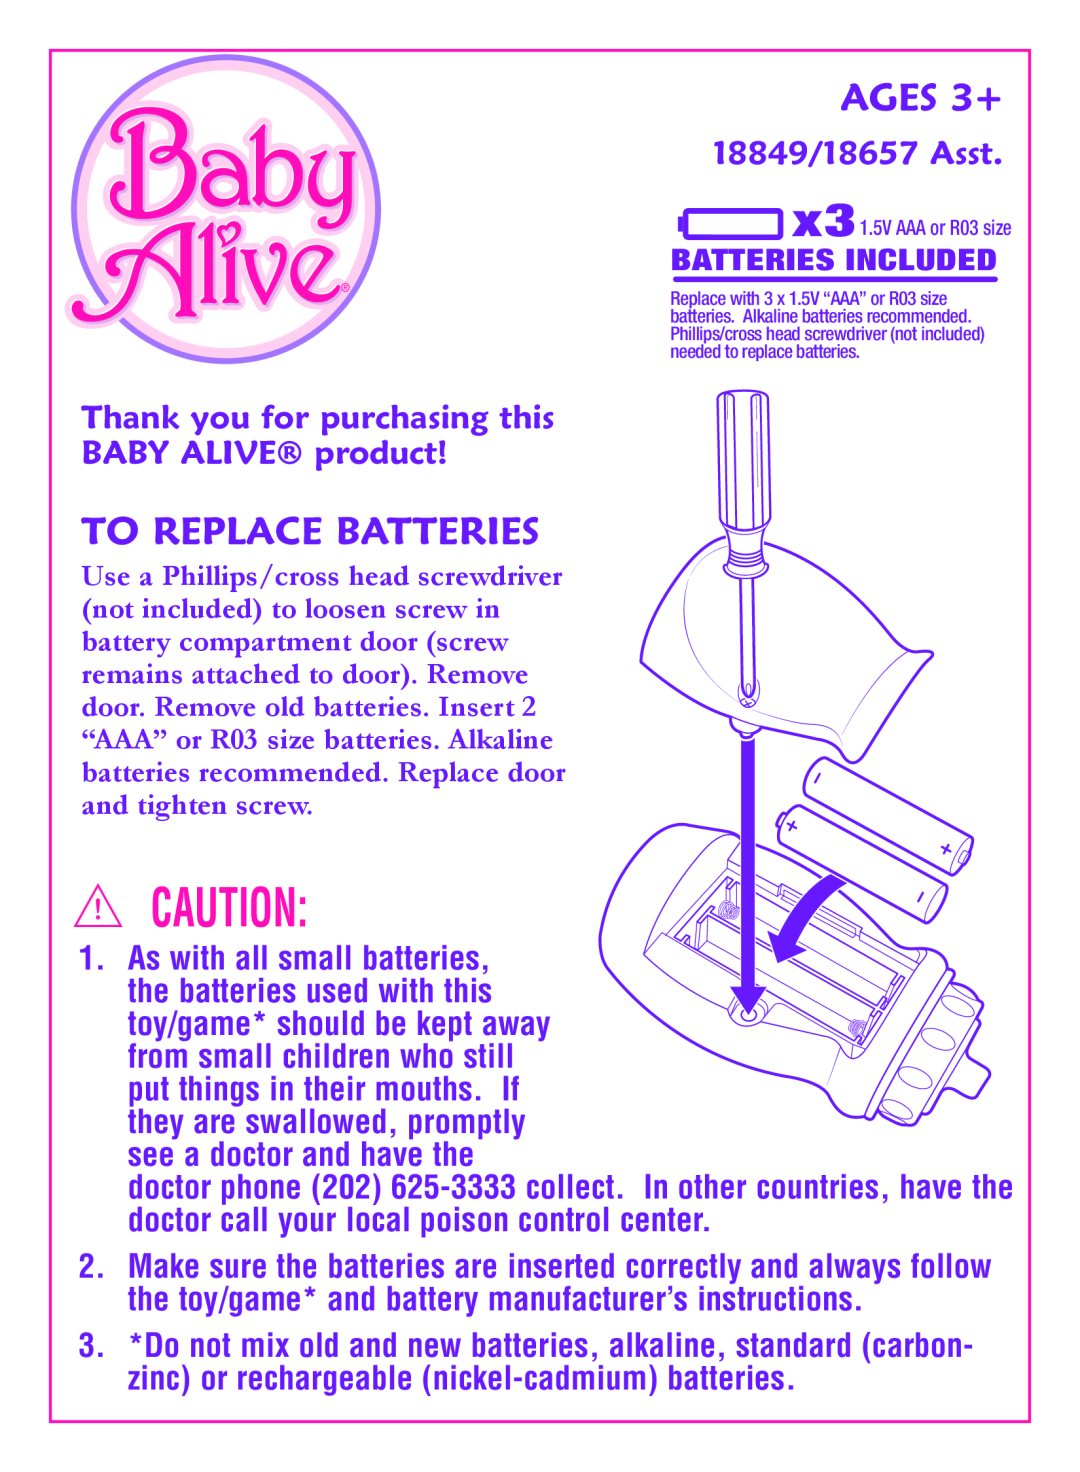 Hasbro manual AGES 3+, To Replace Batteries, 18849/18657 Asst, Thank you for purchasing this BABY ALIVE product 